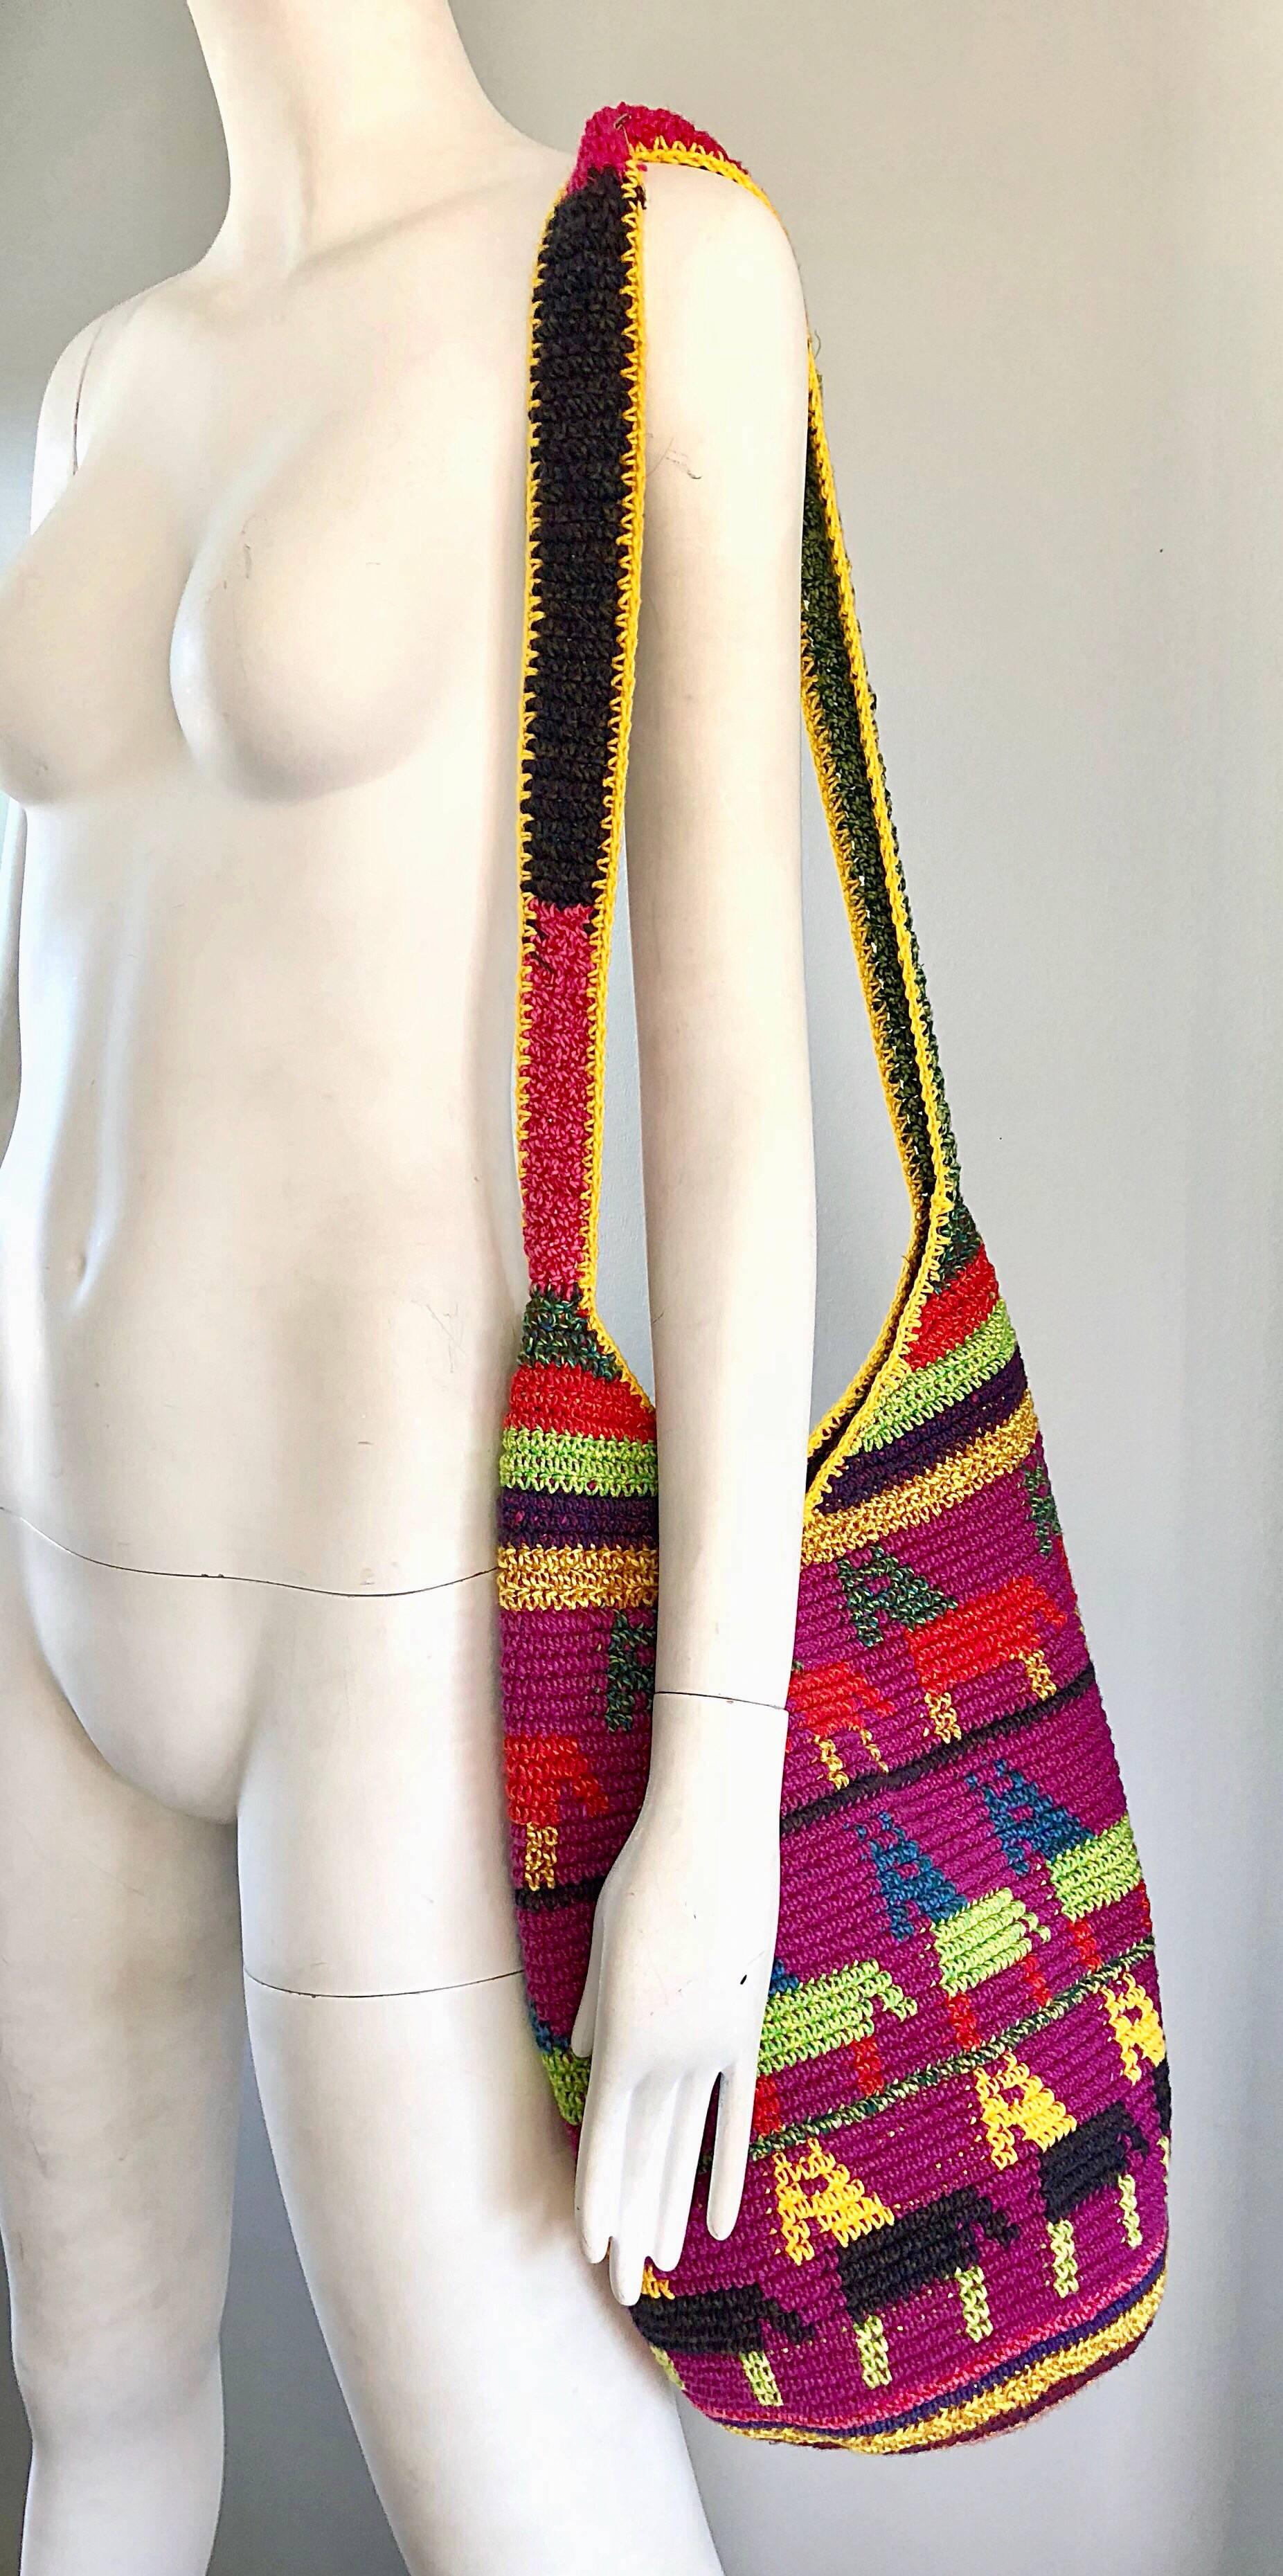 Amazing EXTRA LARGE hand crochet 70s vintage colorful boho shoulder bag, or crossbody / messenger bag! This beauty has it all, and appears to have never been worn! Zipper top makes this handbag perfect for traveling. Hand crochet, with bright colors